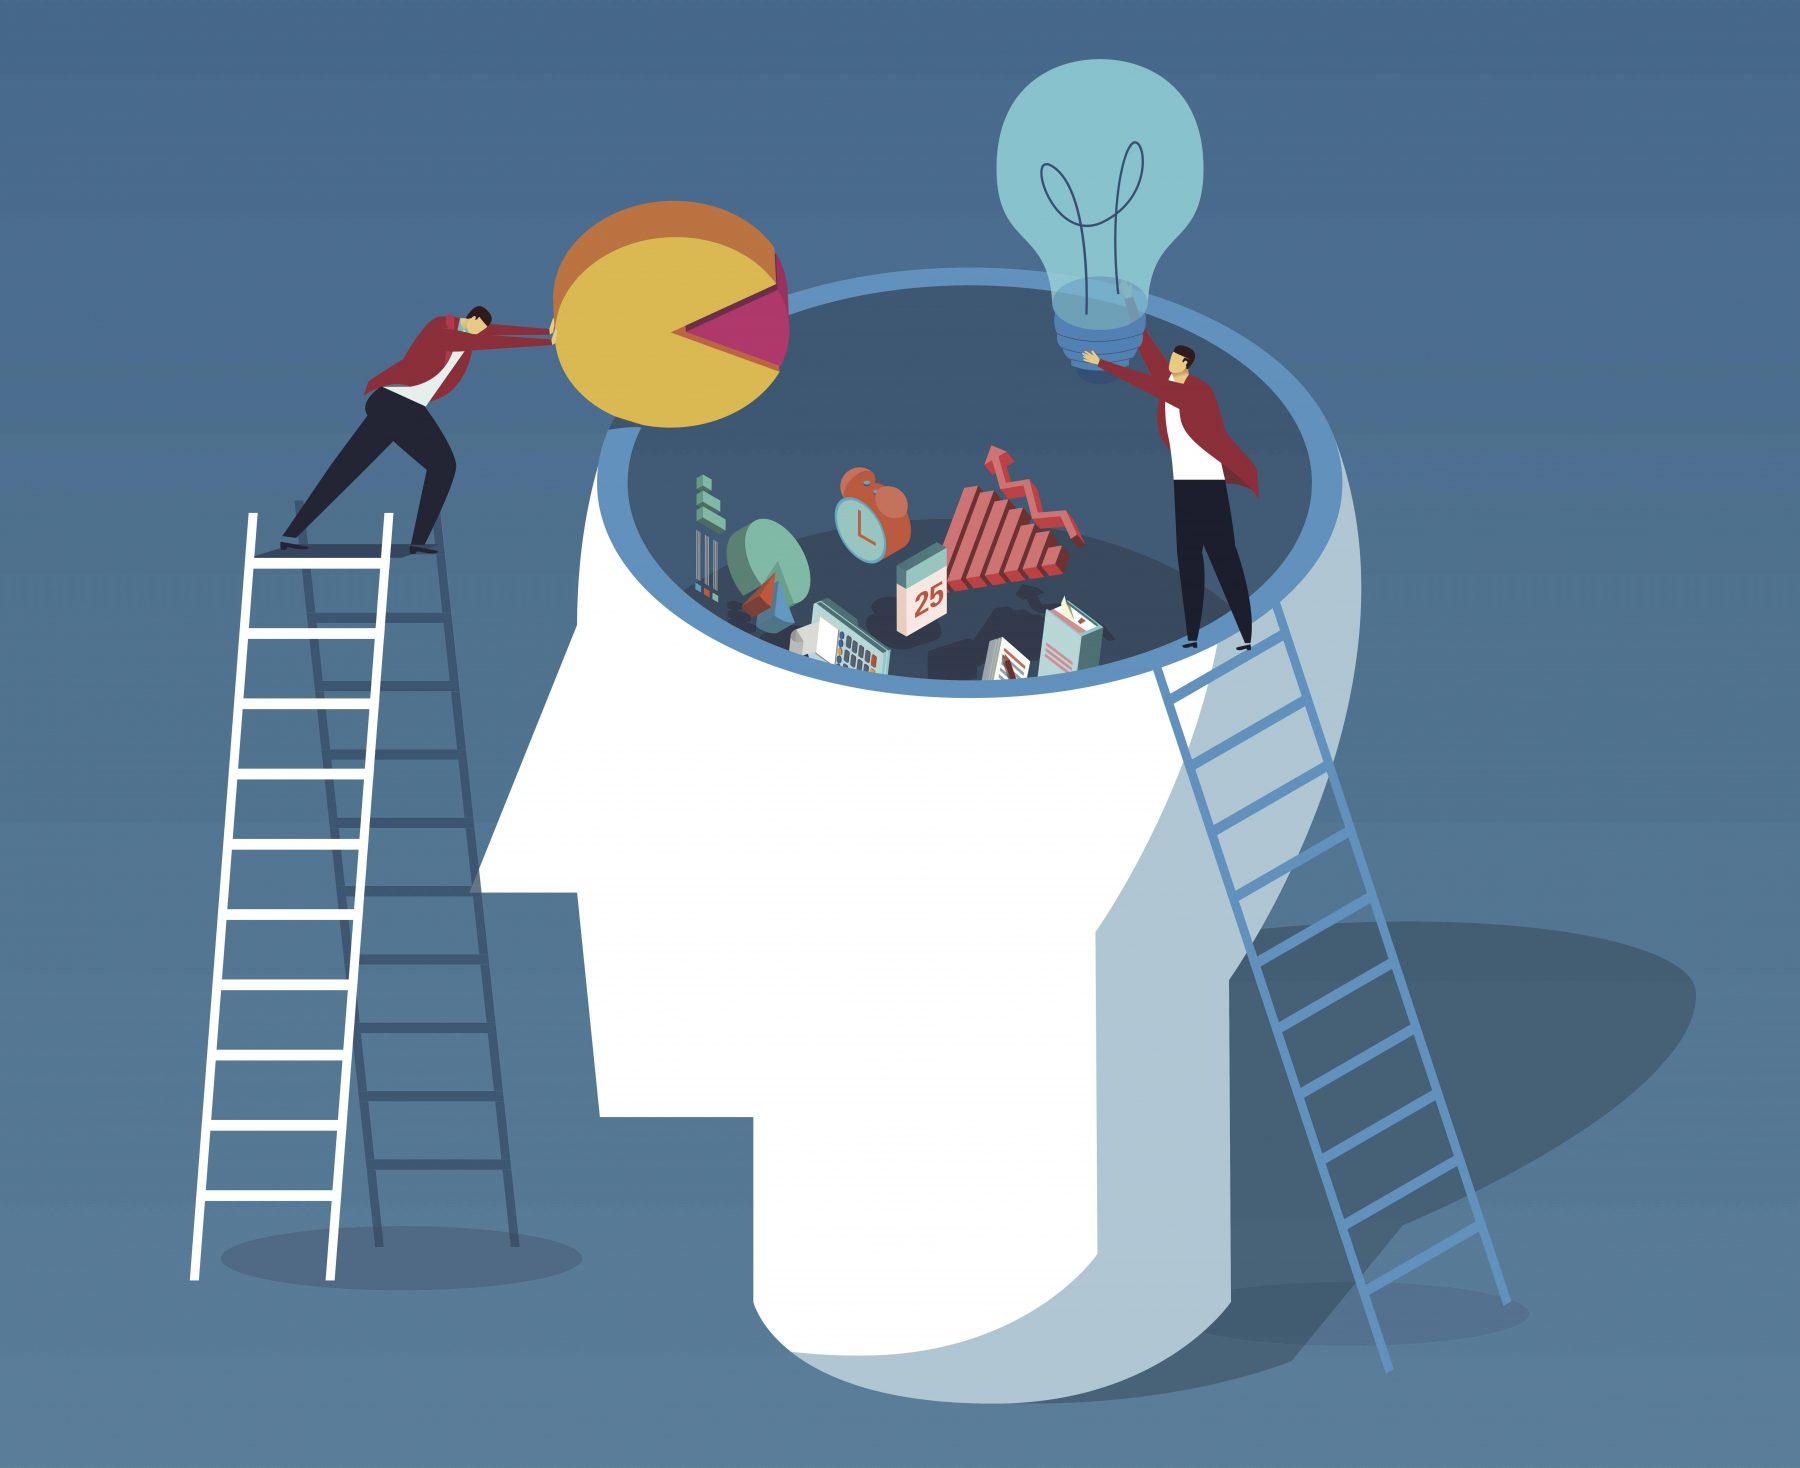 illustration showing two males atop ladders pushing lightbulbs and other symbols into the top of a giant human head to symbolize ideas